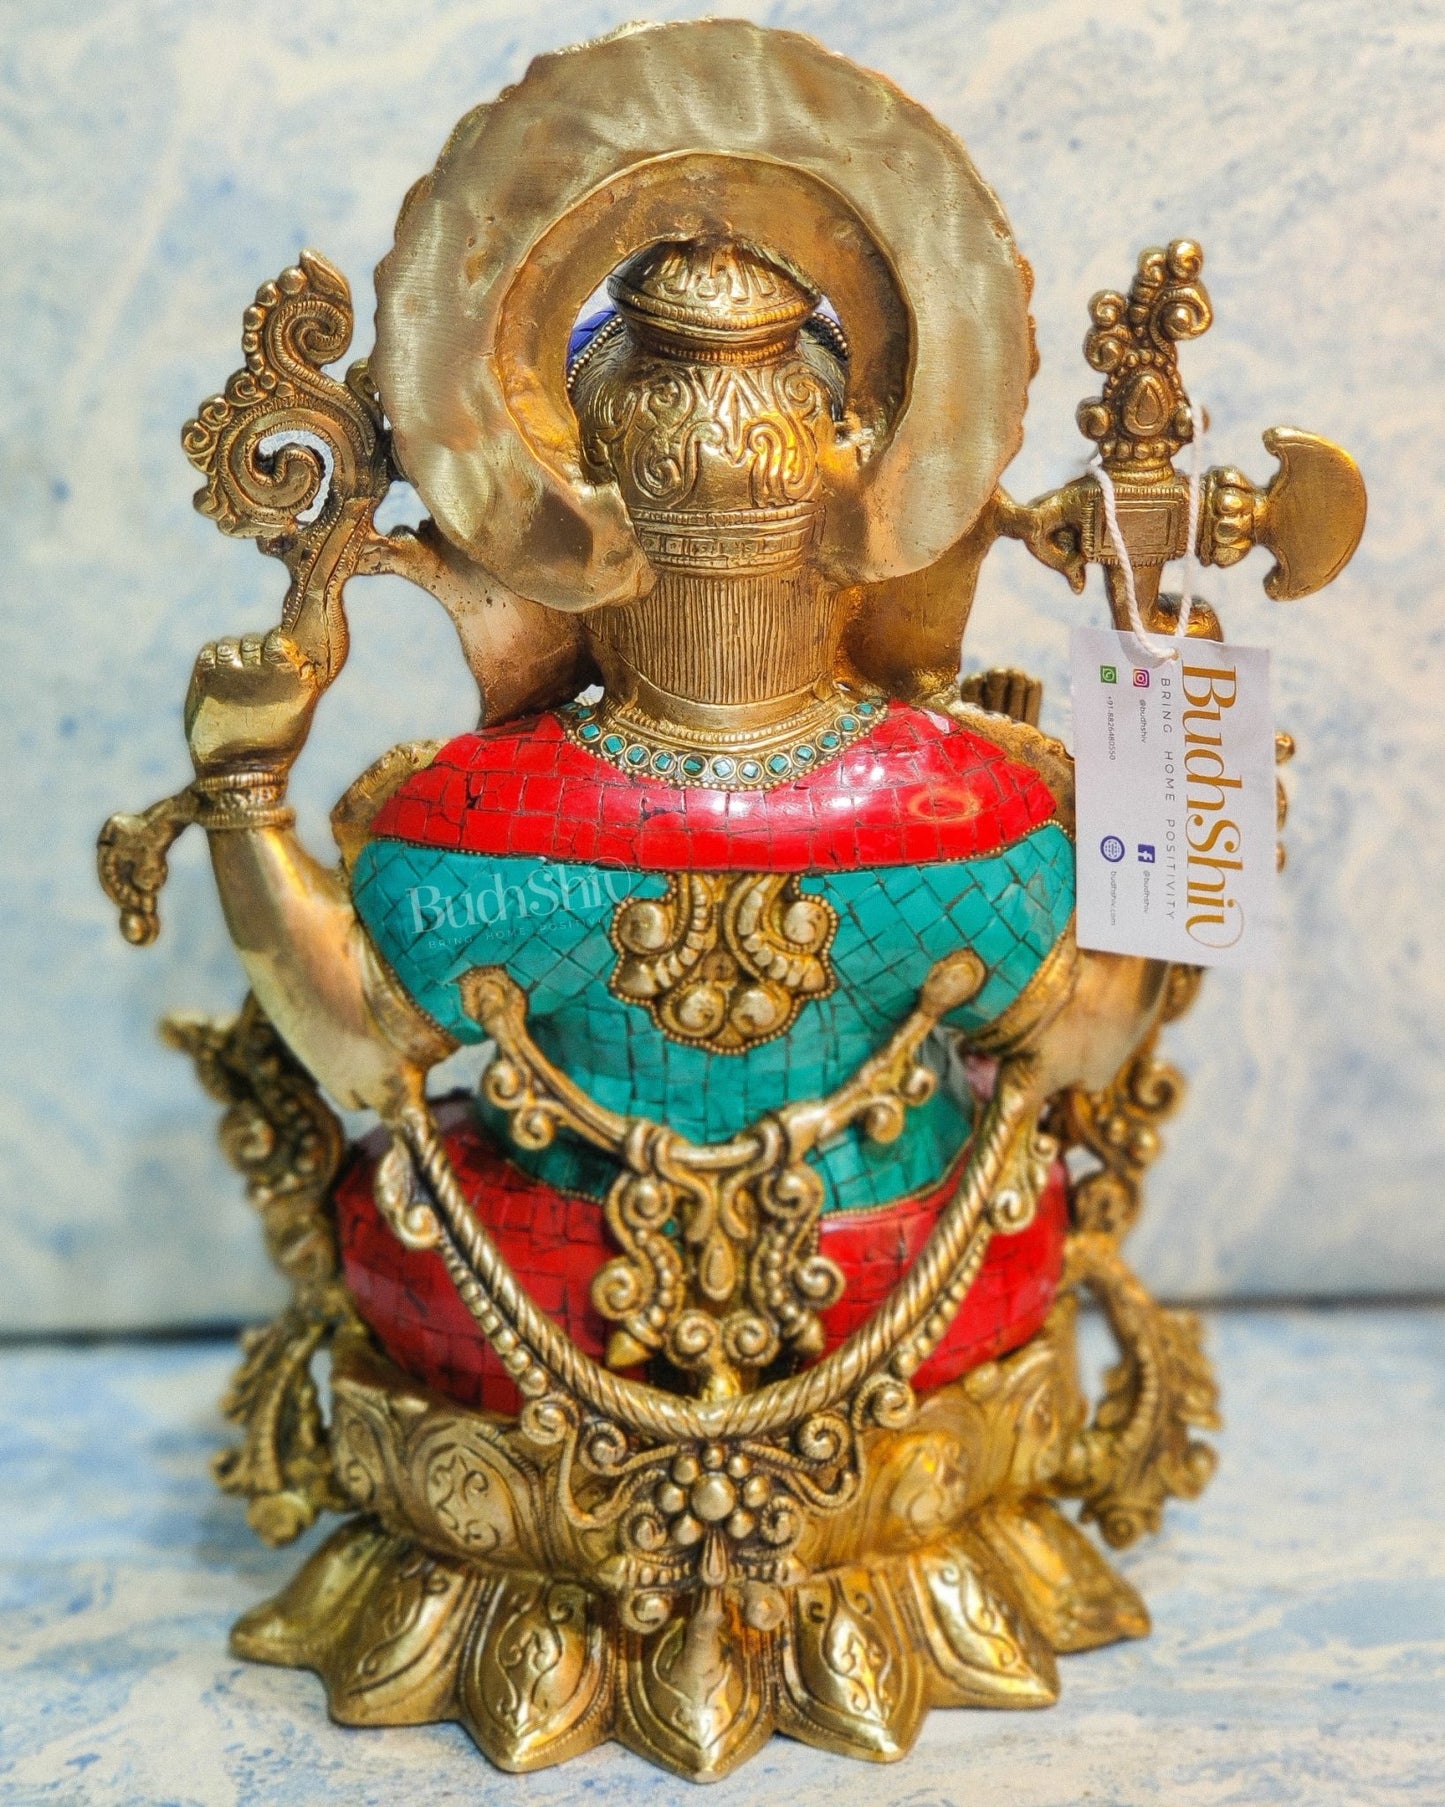 Ganesha Brass Idol Ganapati Brass Idol with a unique trunk and four hands Ganesha brass statue with stonework 16 inches - Budhshiv.com